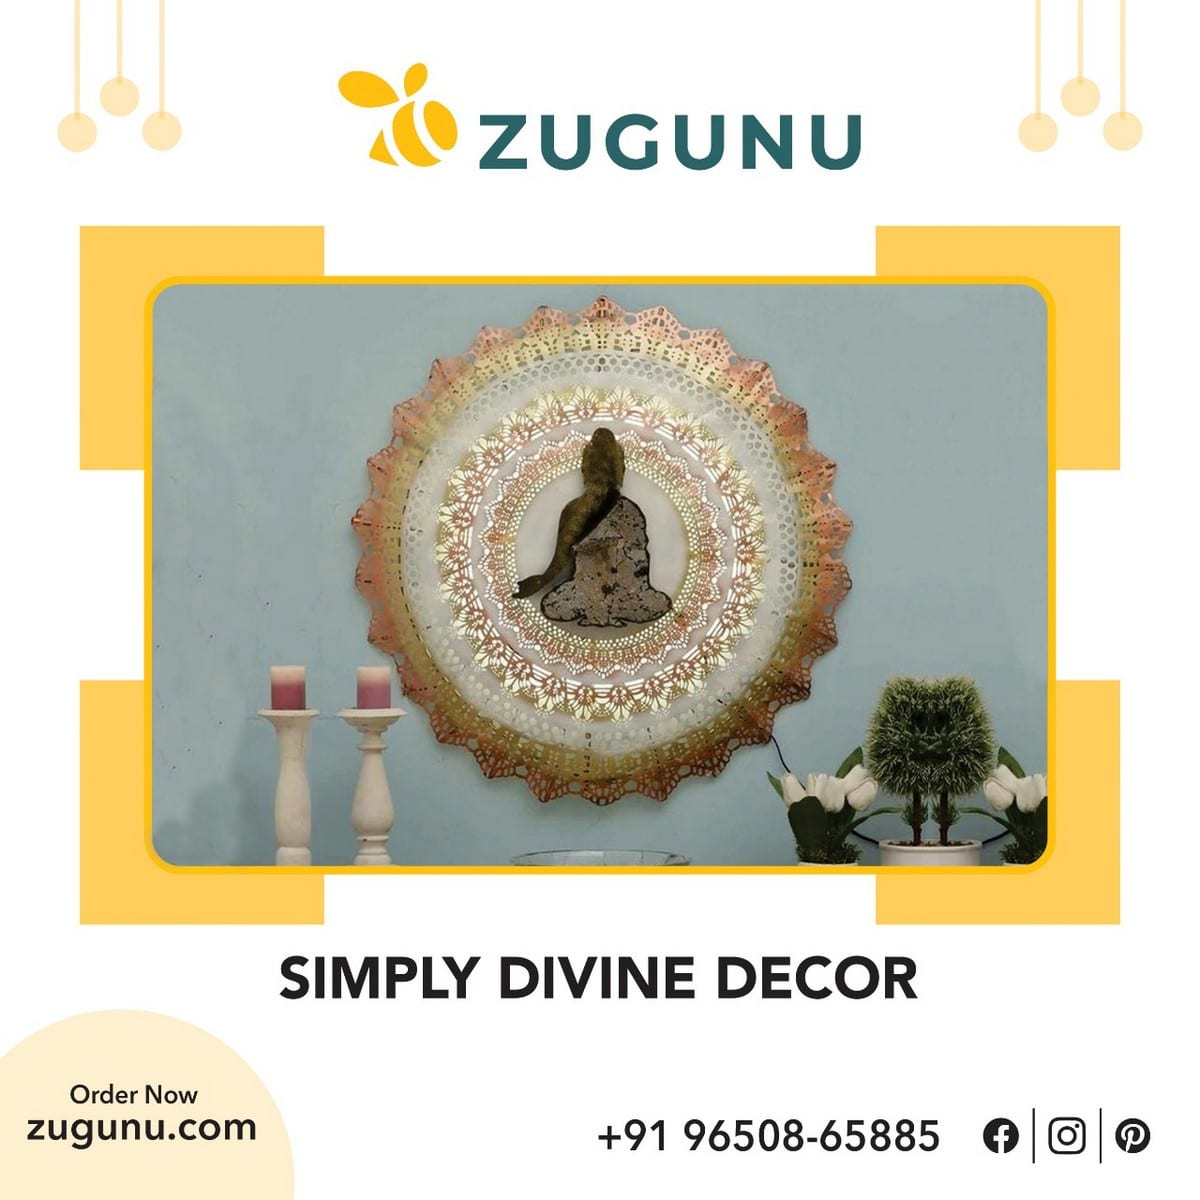 Get The Simply Divine Decor For A Peaceful Comfort Place